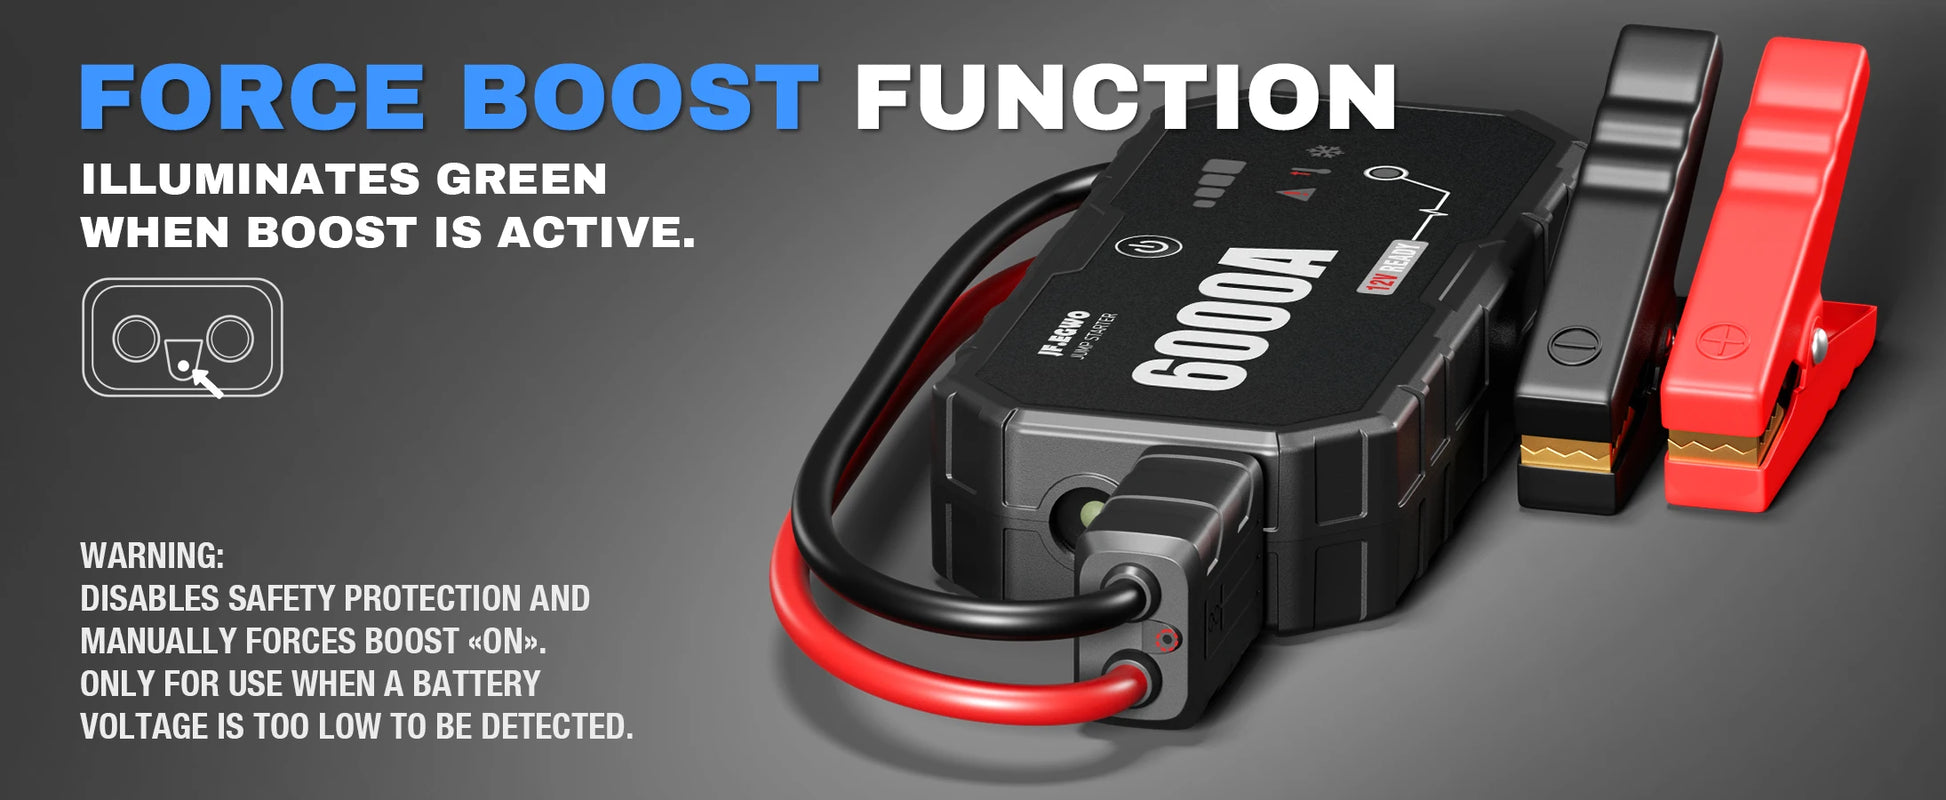 JF.EGWO Jump Starter 6000A Power Bank Auto Battery Charger Booster - Inverted Powers